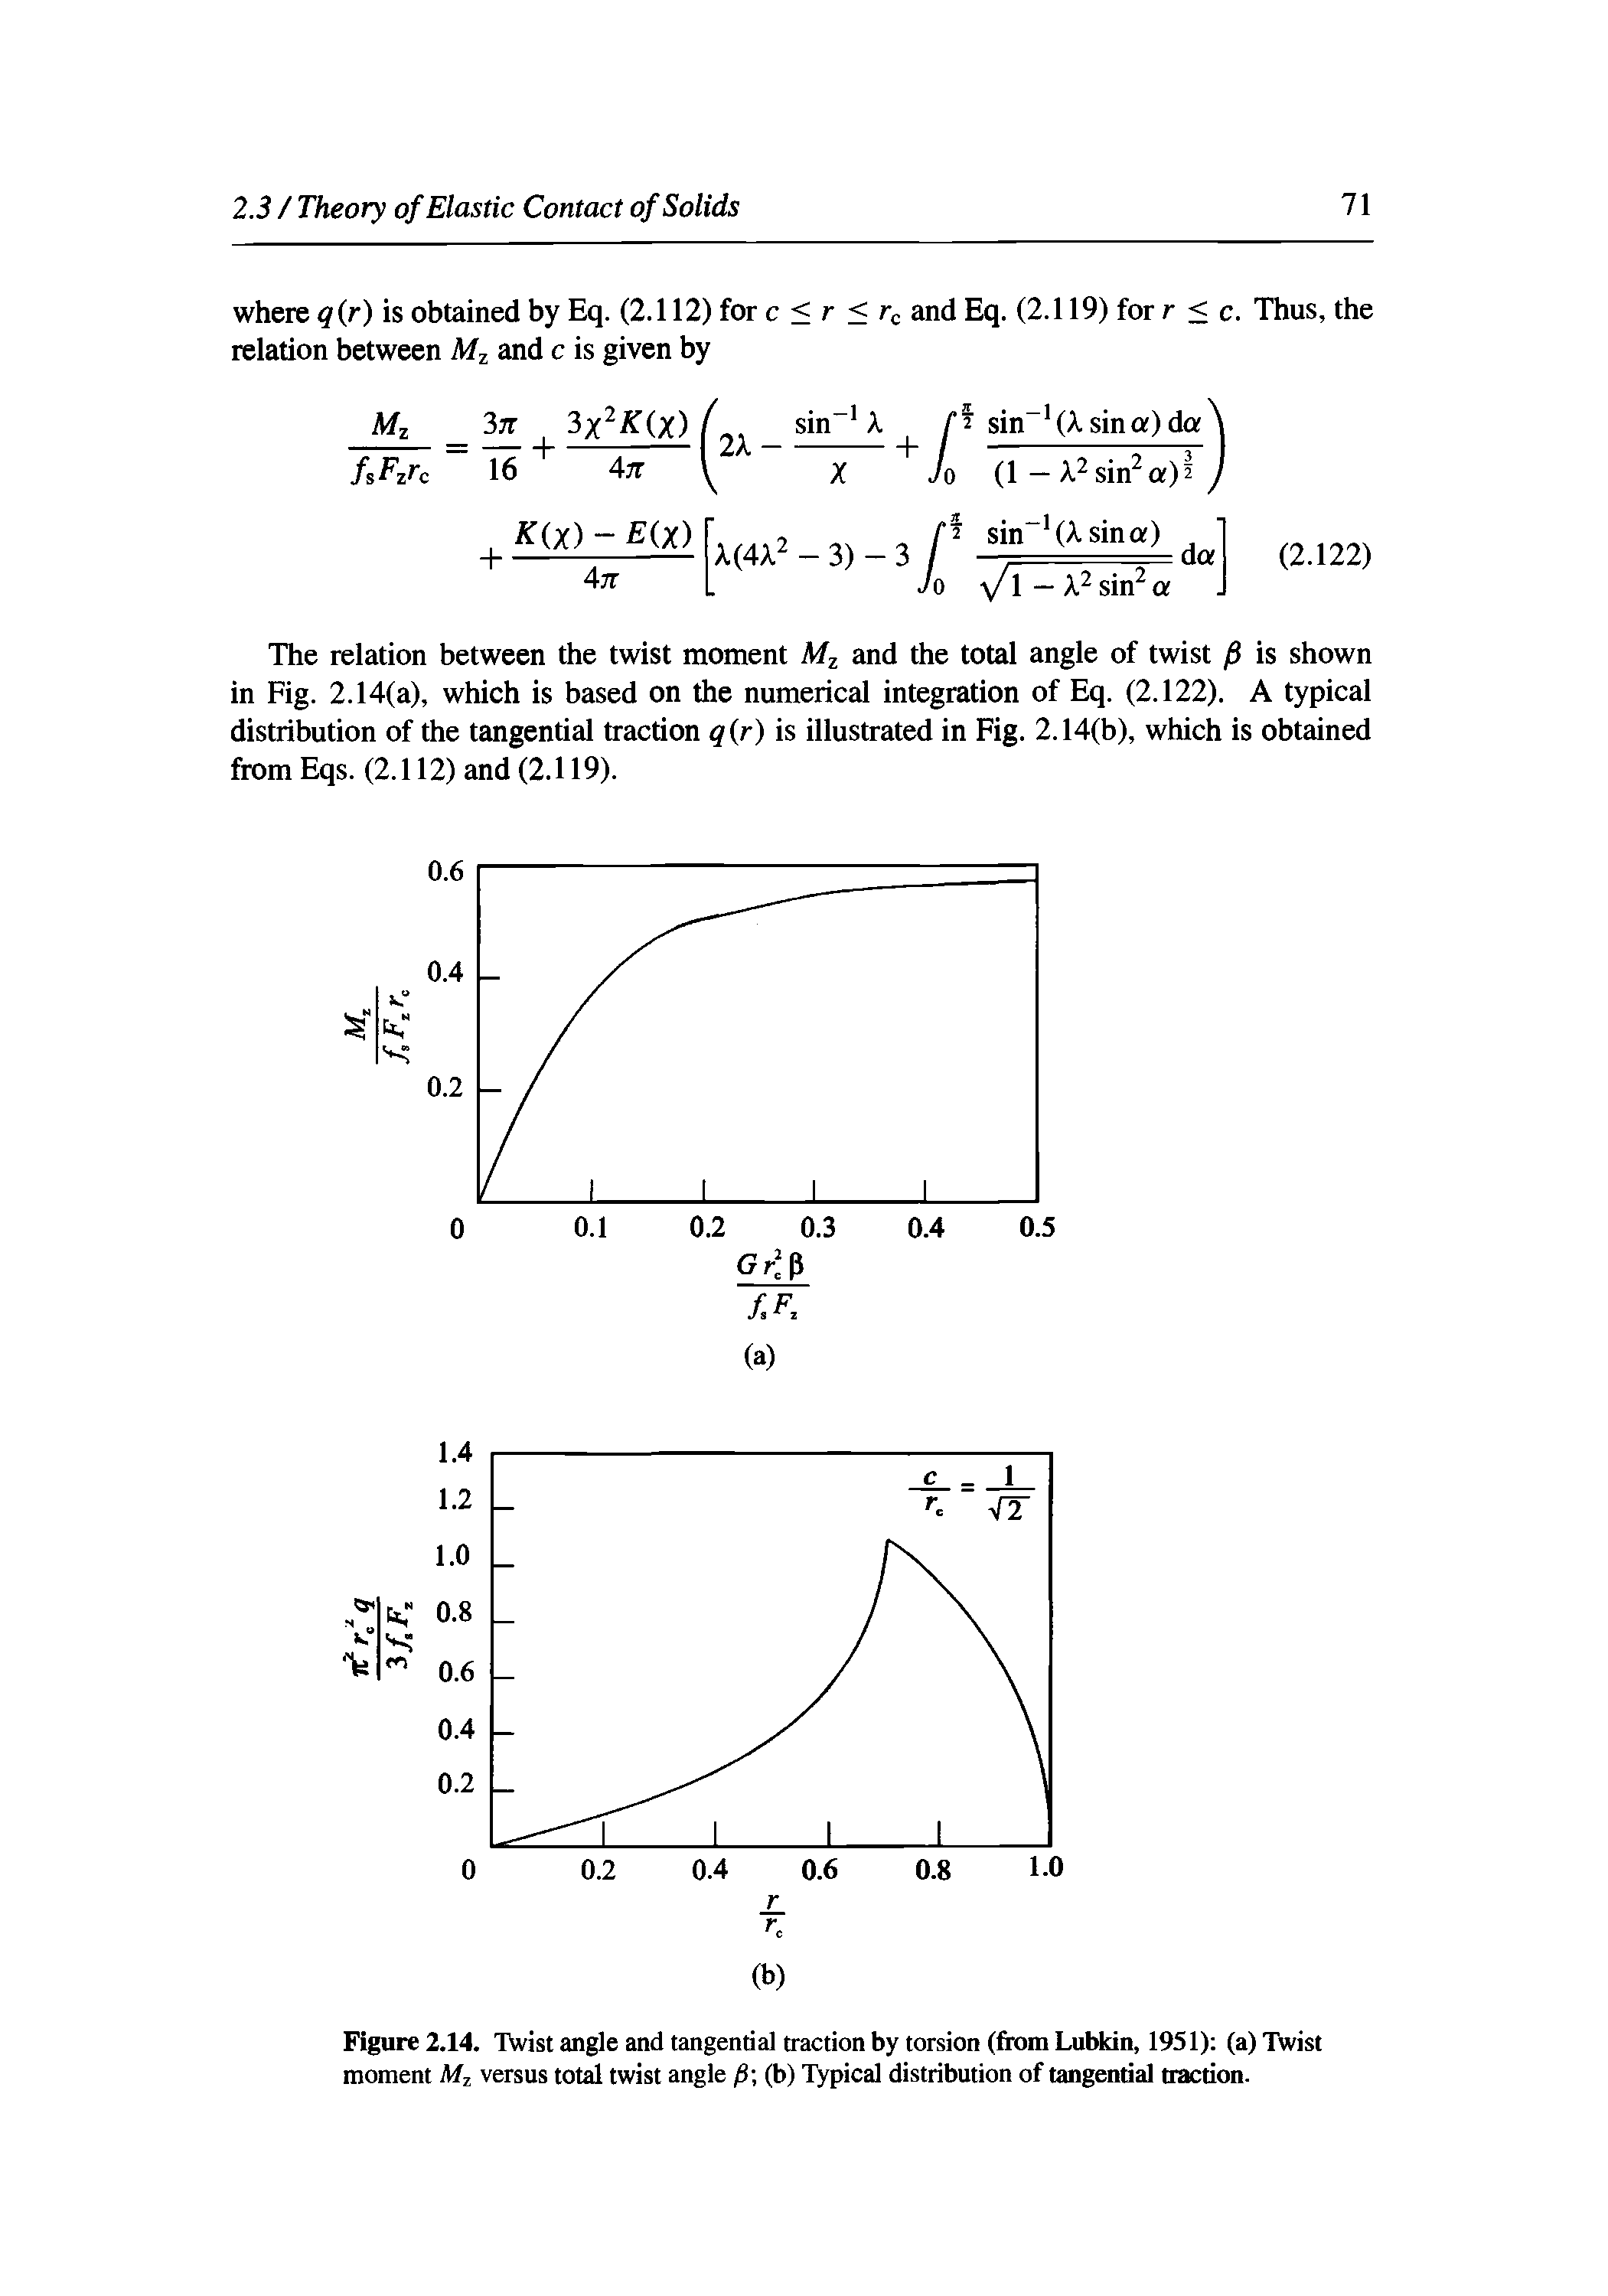 Figure 2.14. Twist angle and tangential traction by torsion (from Lubkin, 1951) (a) Twist moment Mz versus total twist angle fi (b) Typical distribution of tangential traction.